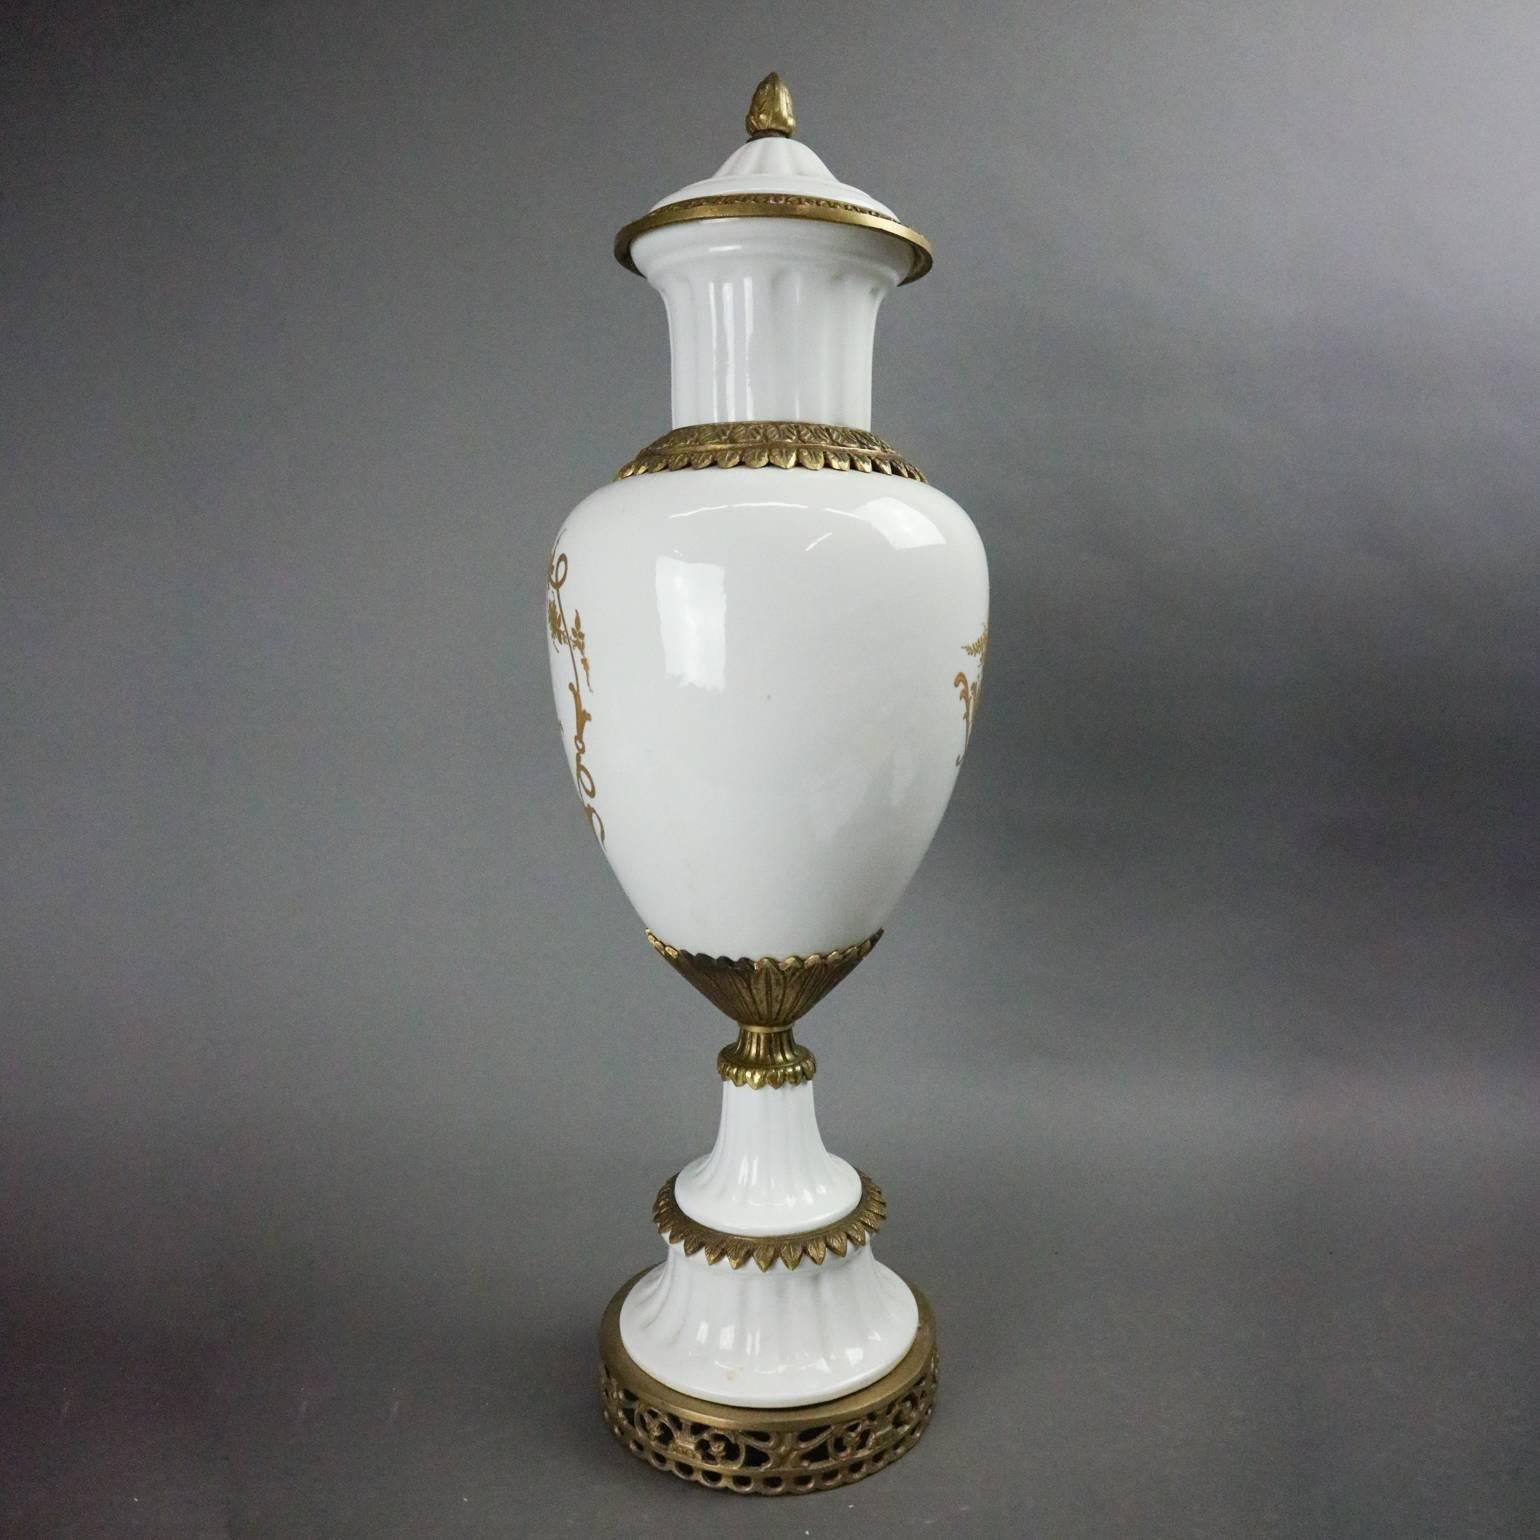 Antique French Neoclassical porcelain urn features gilt foliate with musical instrument decoration and bronze accoutrements, artist signed Pierre Jusier with Sevres mark on base, circa 1940

Measures - 23" H x 8" diam.